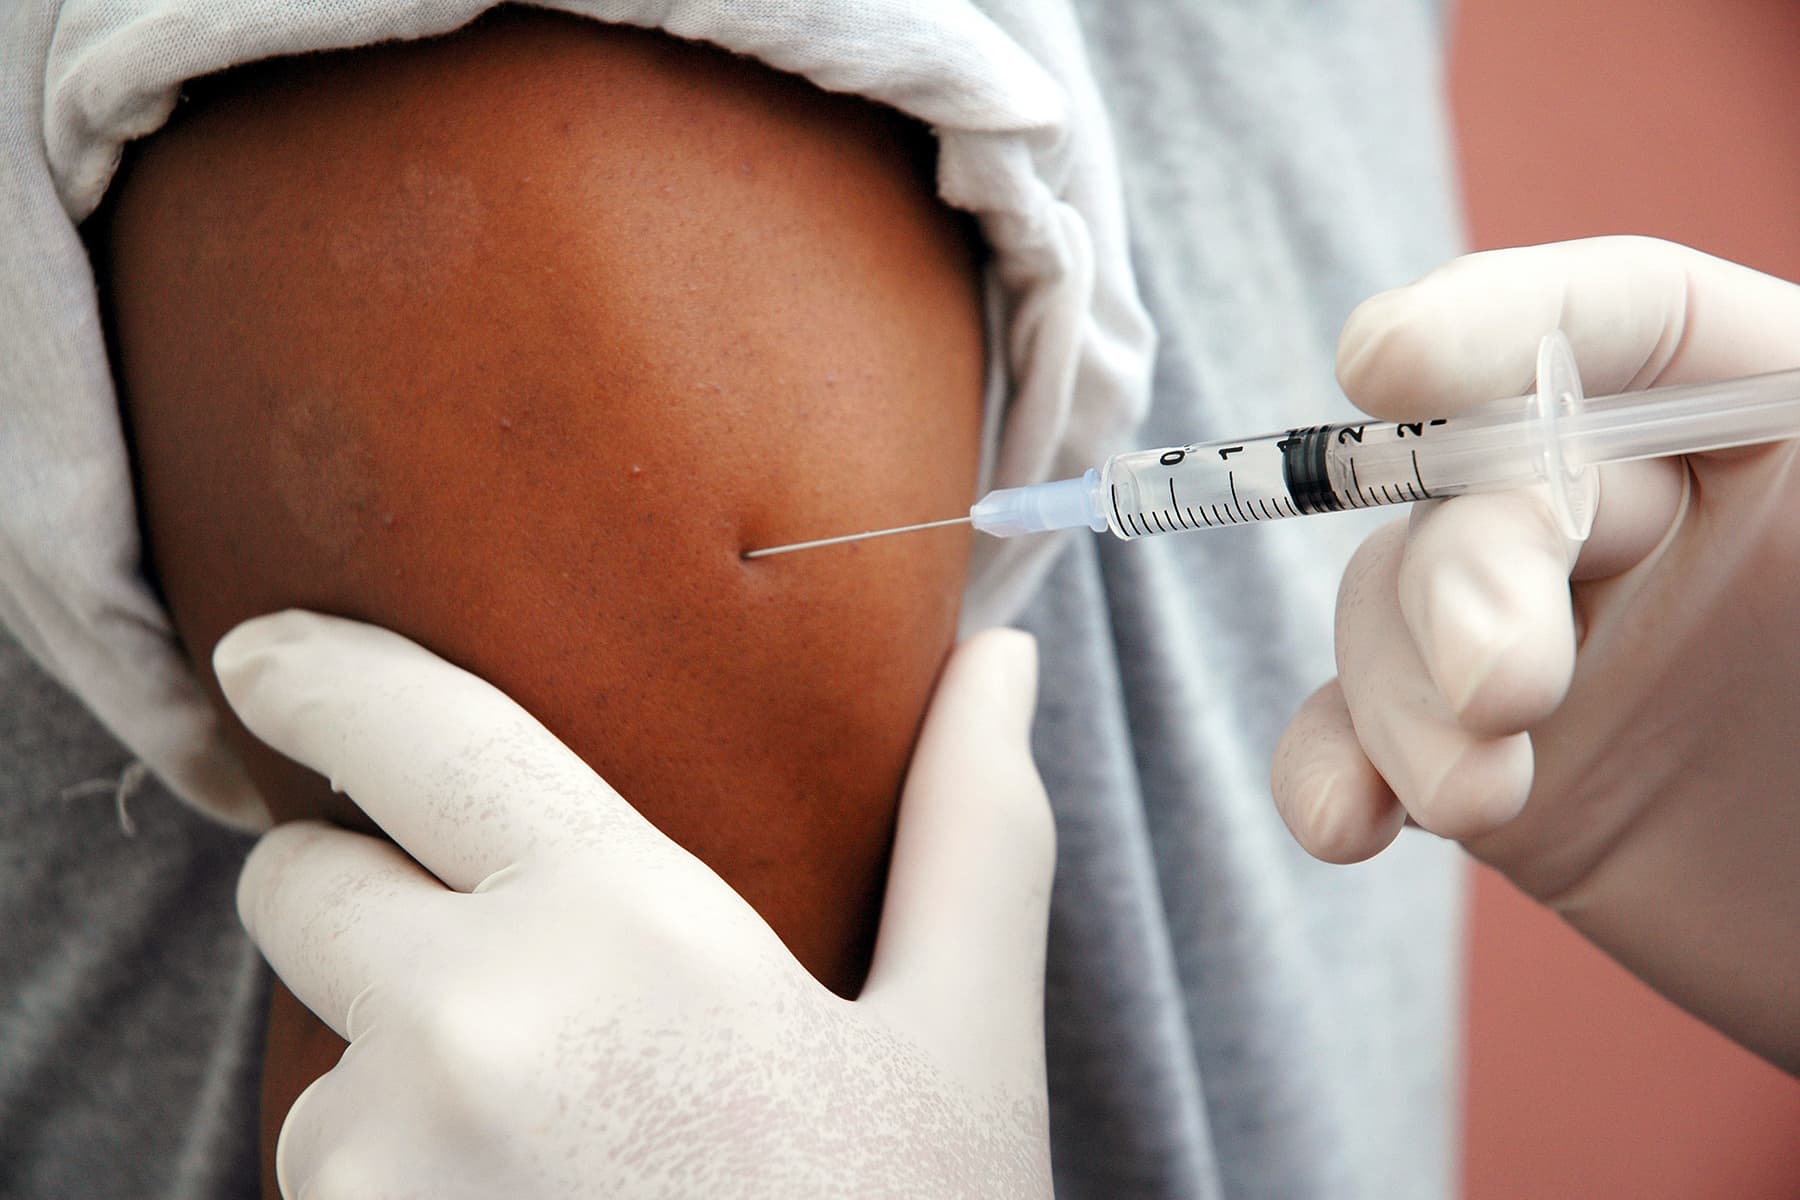 Search: 60% of Americans Will Lengthen or Skip Flu Shot This one year